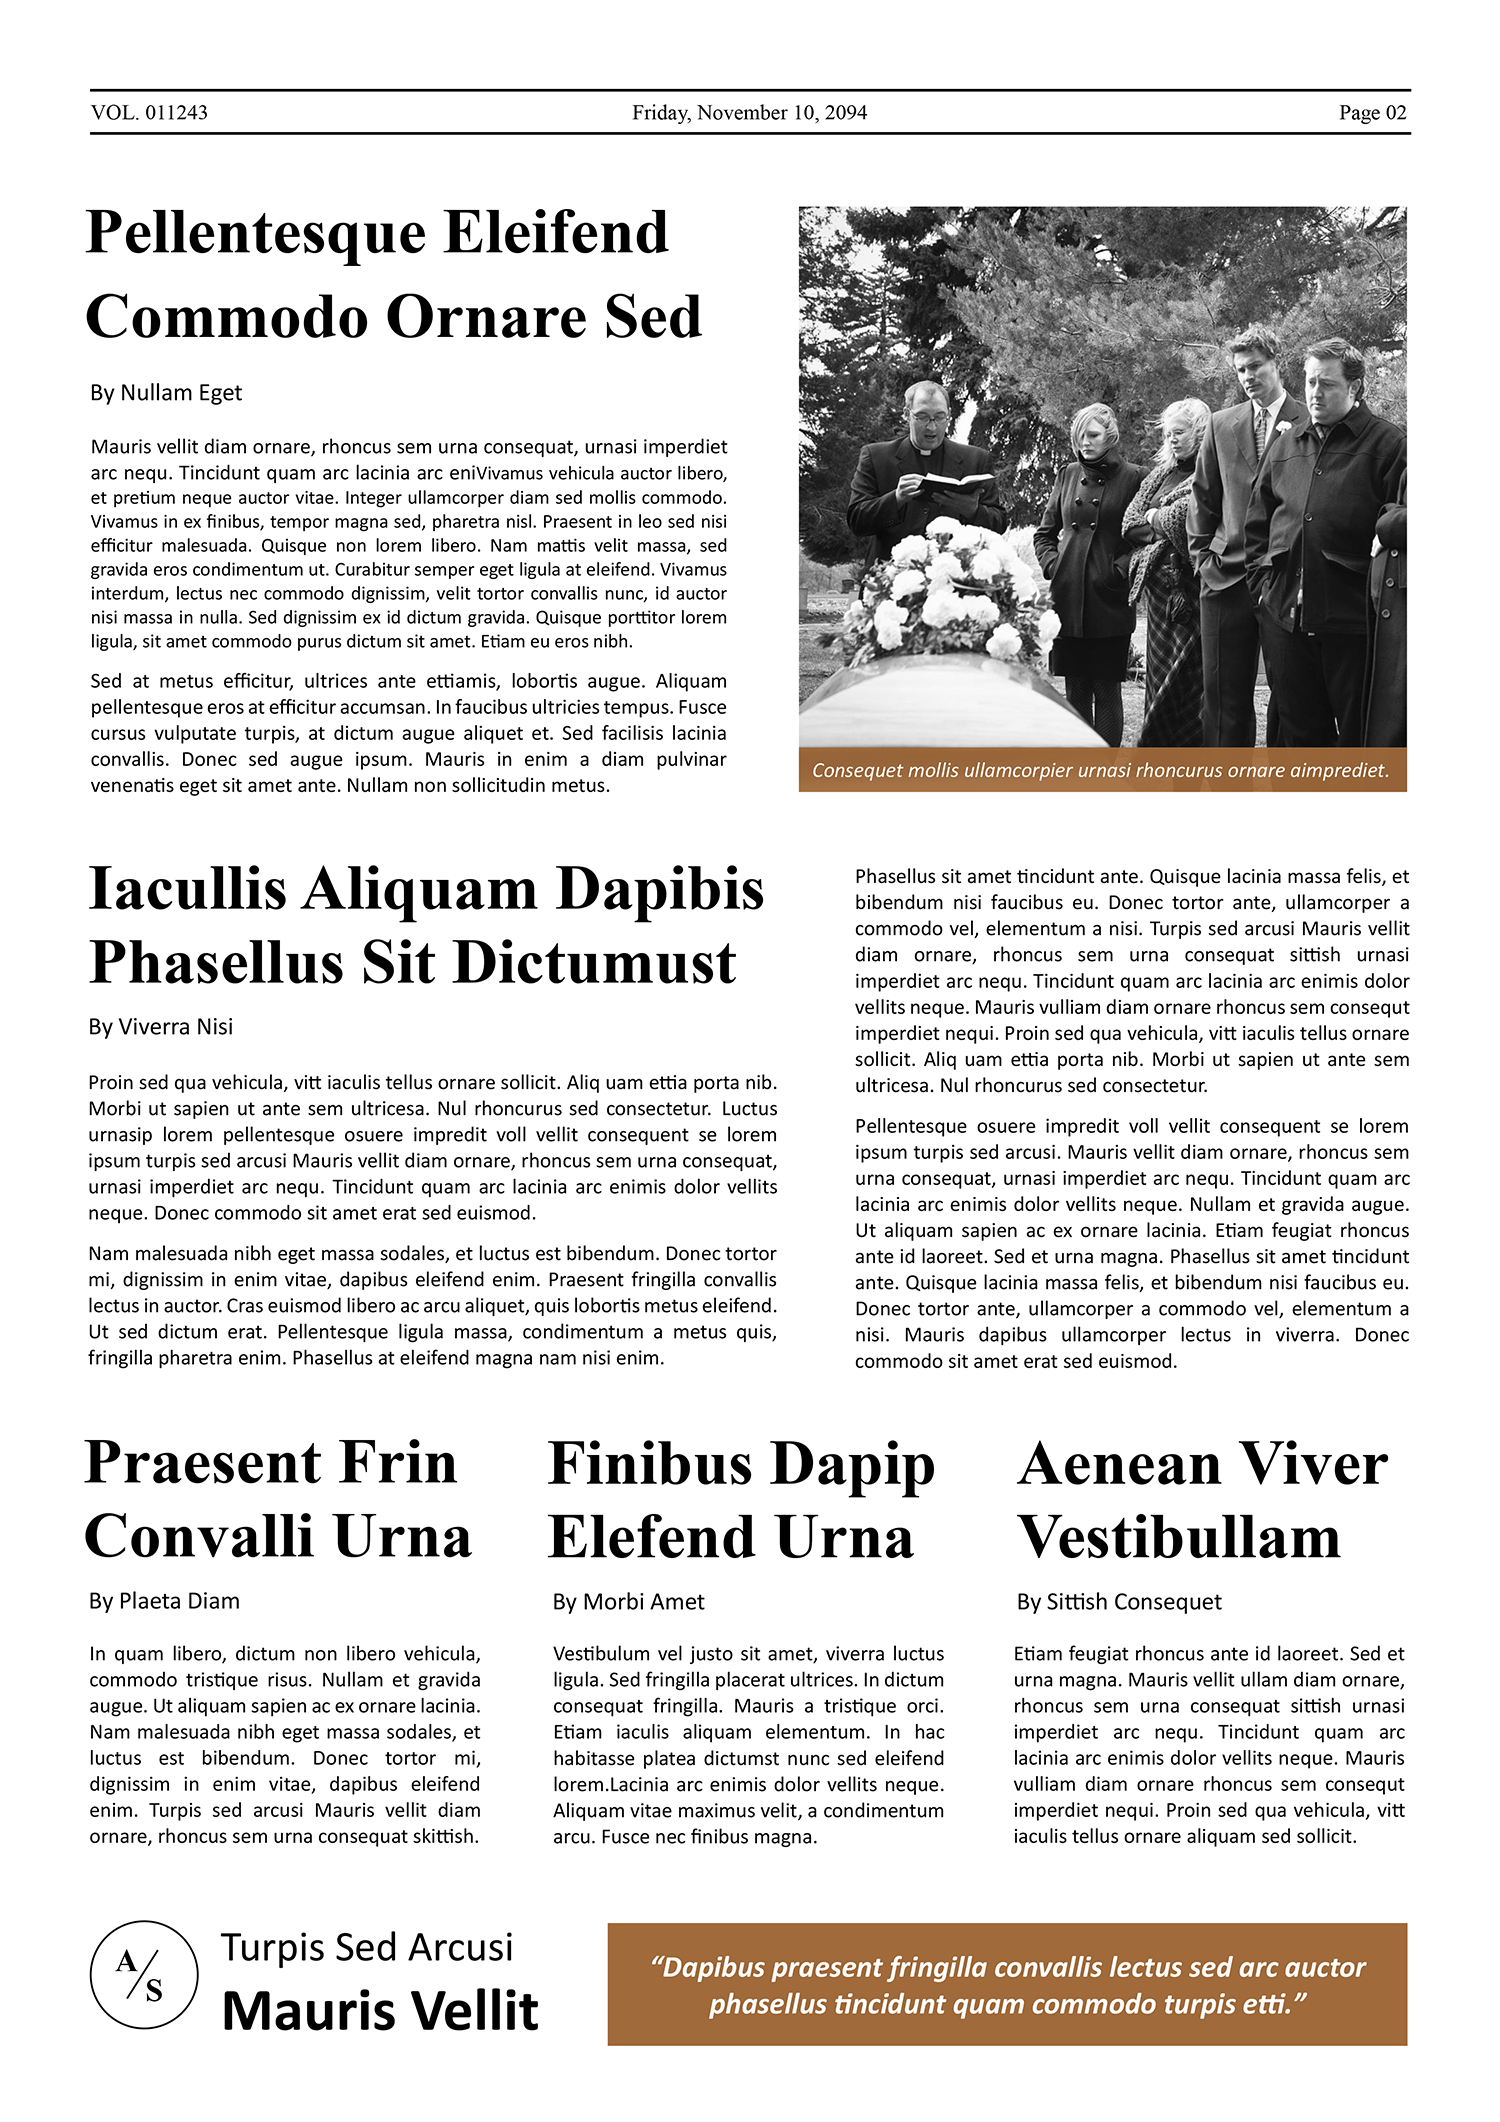 Obituary and Acknowledgemnt Newspaper Template - Page 02